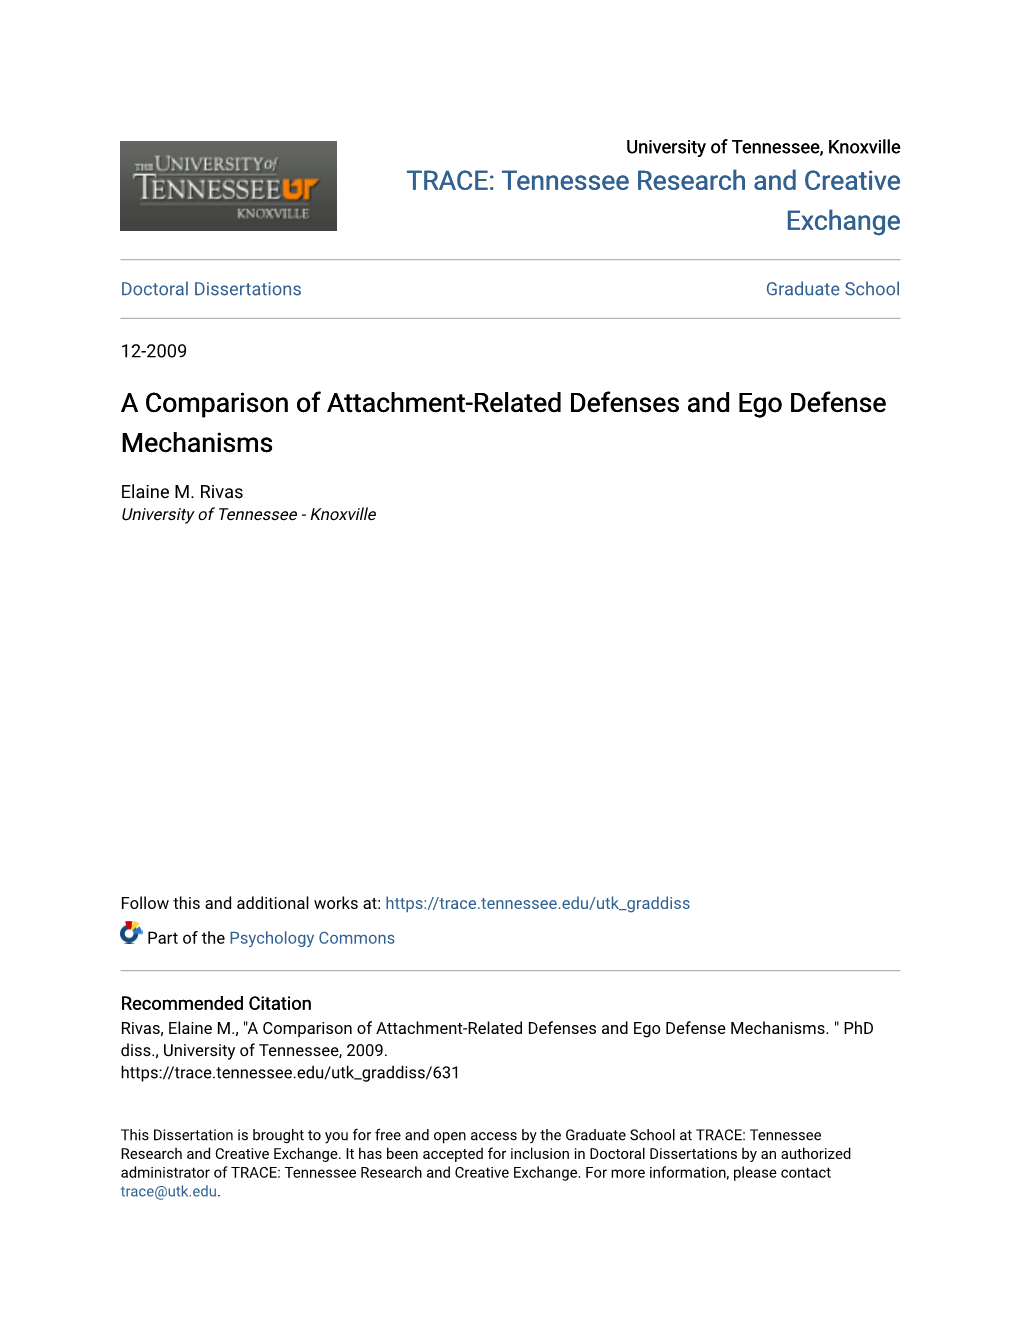 A Comparison of Attachment-Related Defenses and Ego Defense Mechanisms